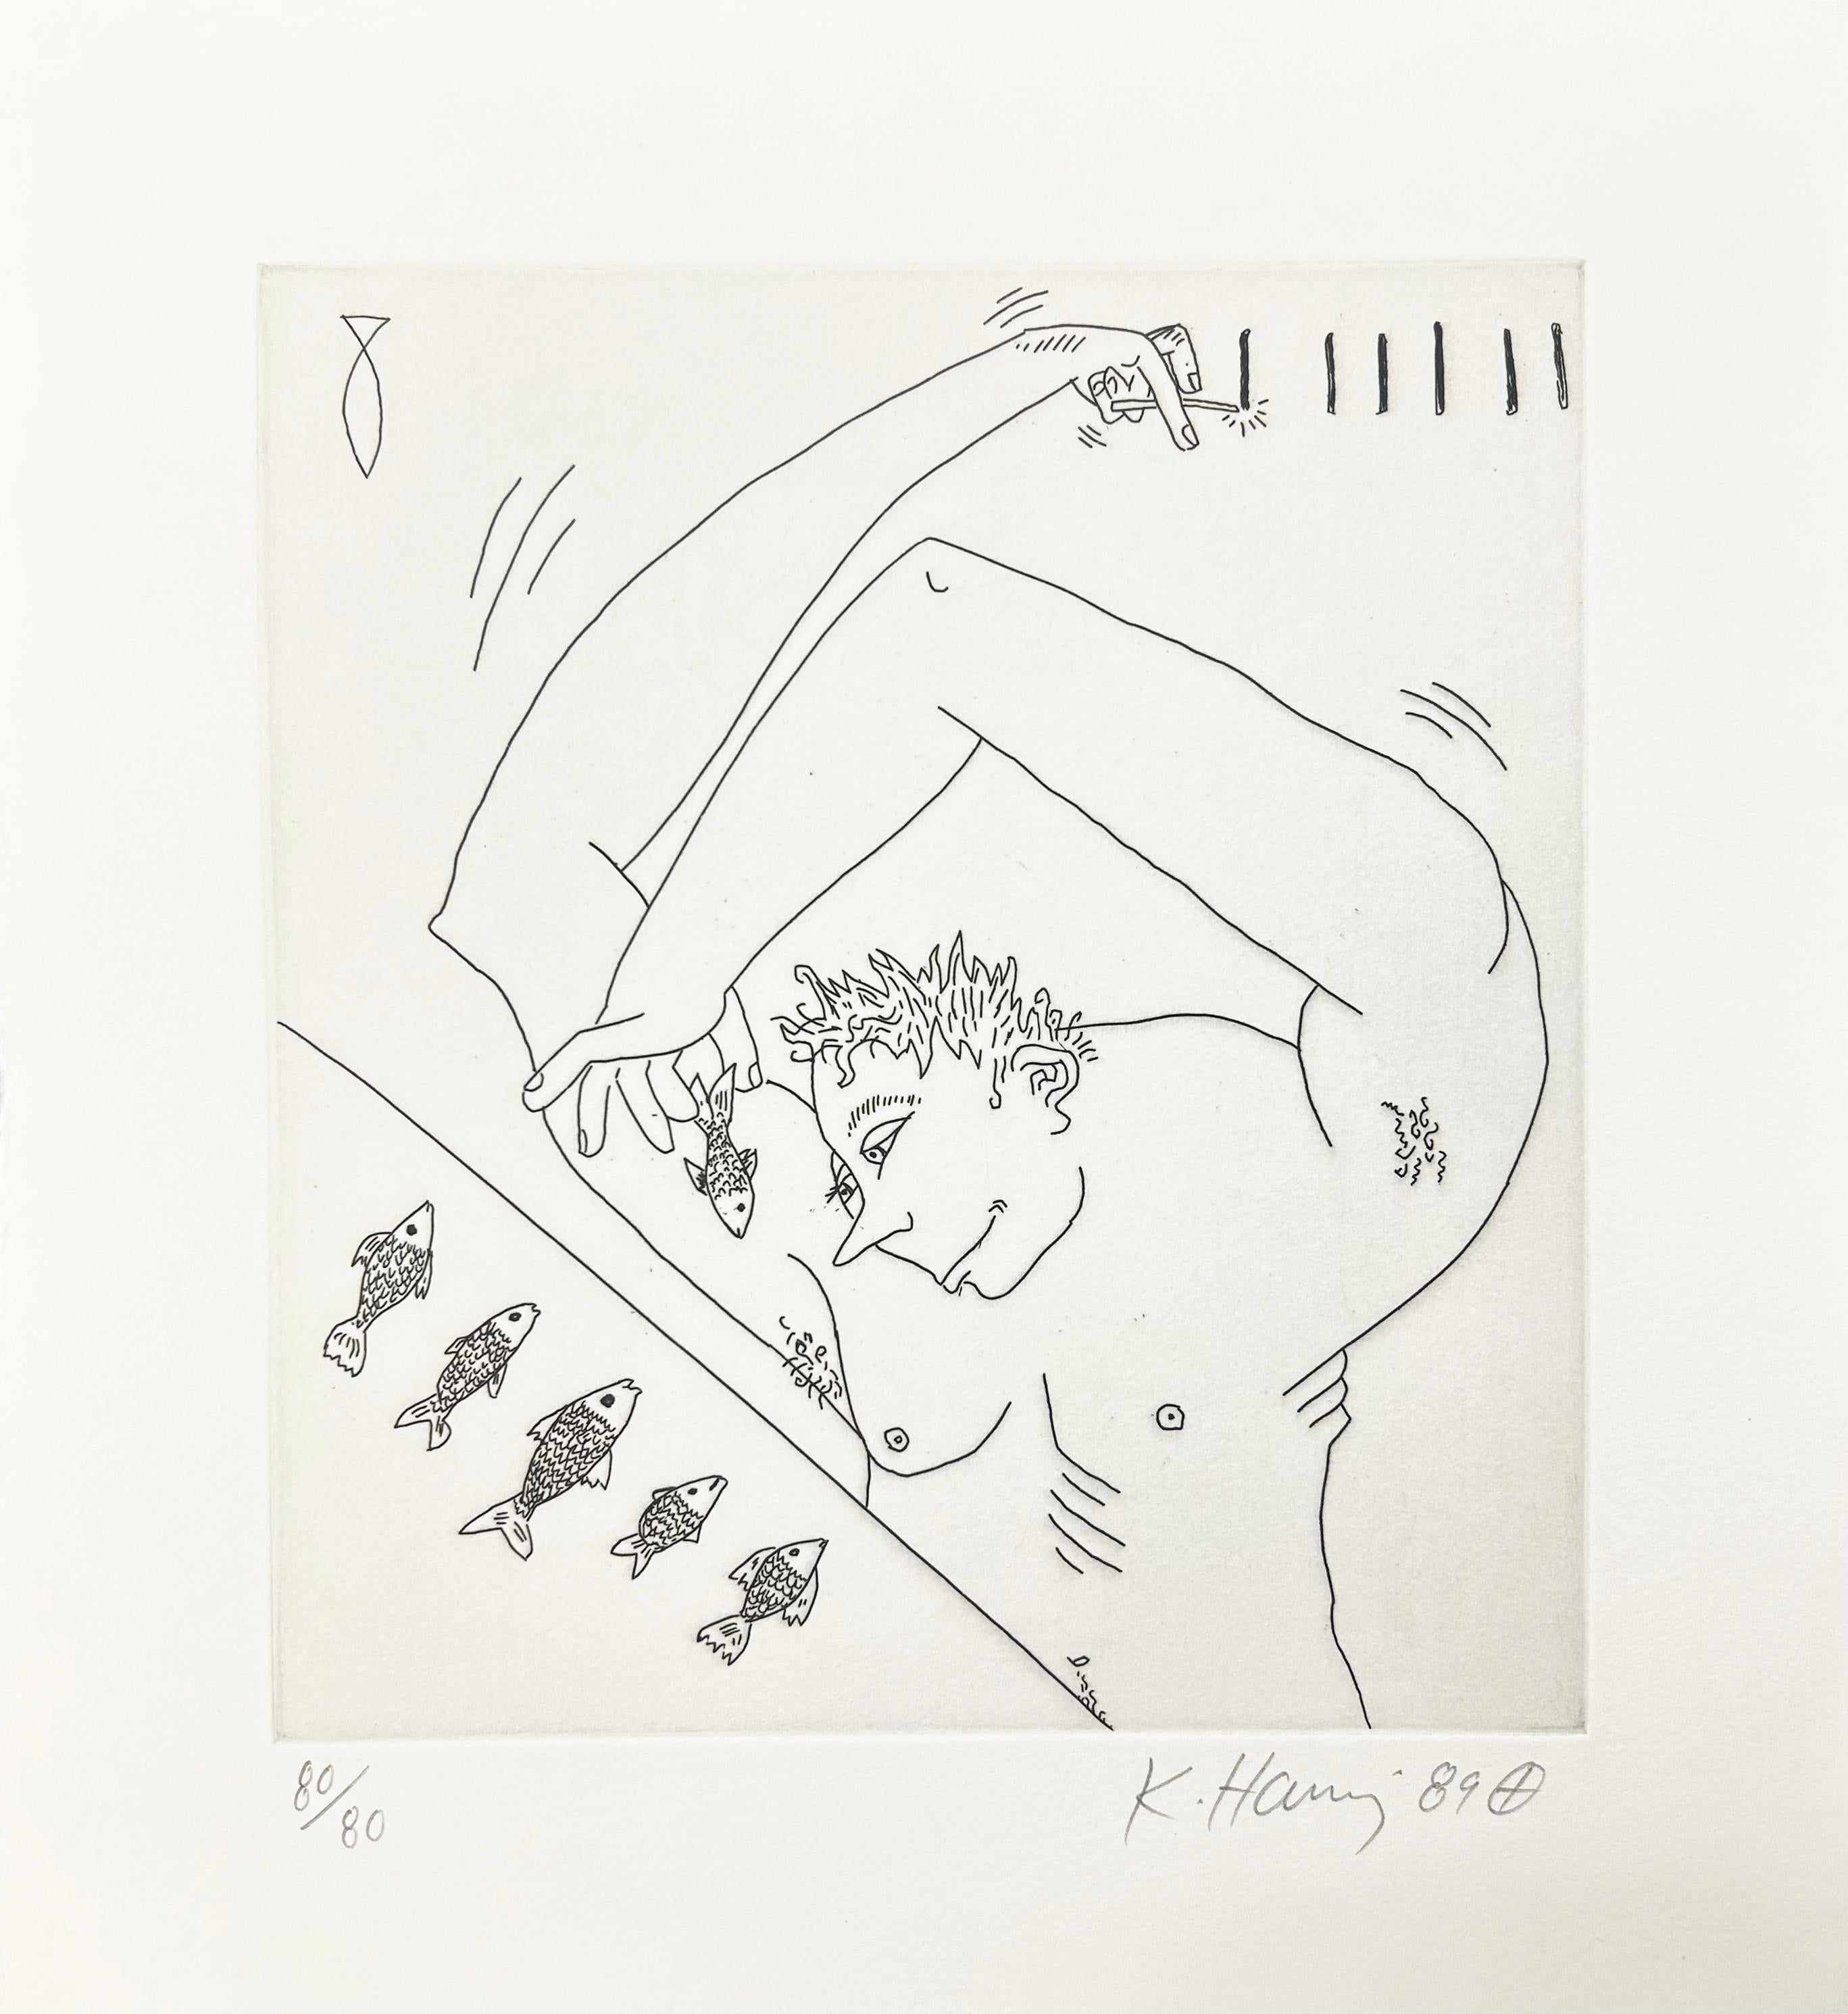 Keith Haring Figurative Print - Untitled IX, from The Valley  Original Etching from 1989